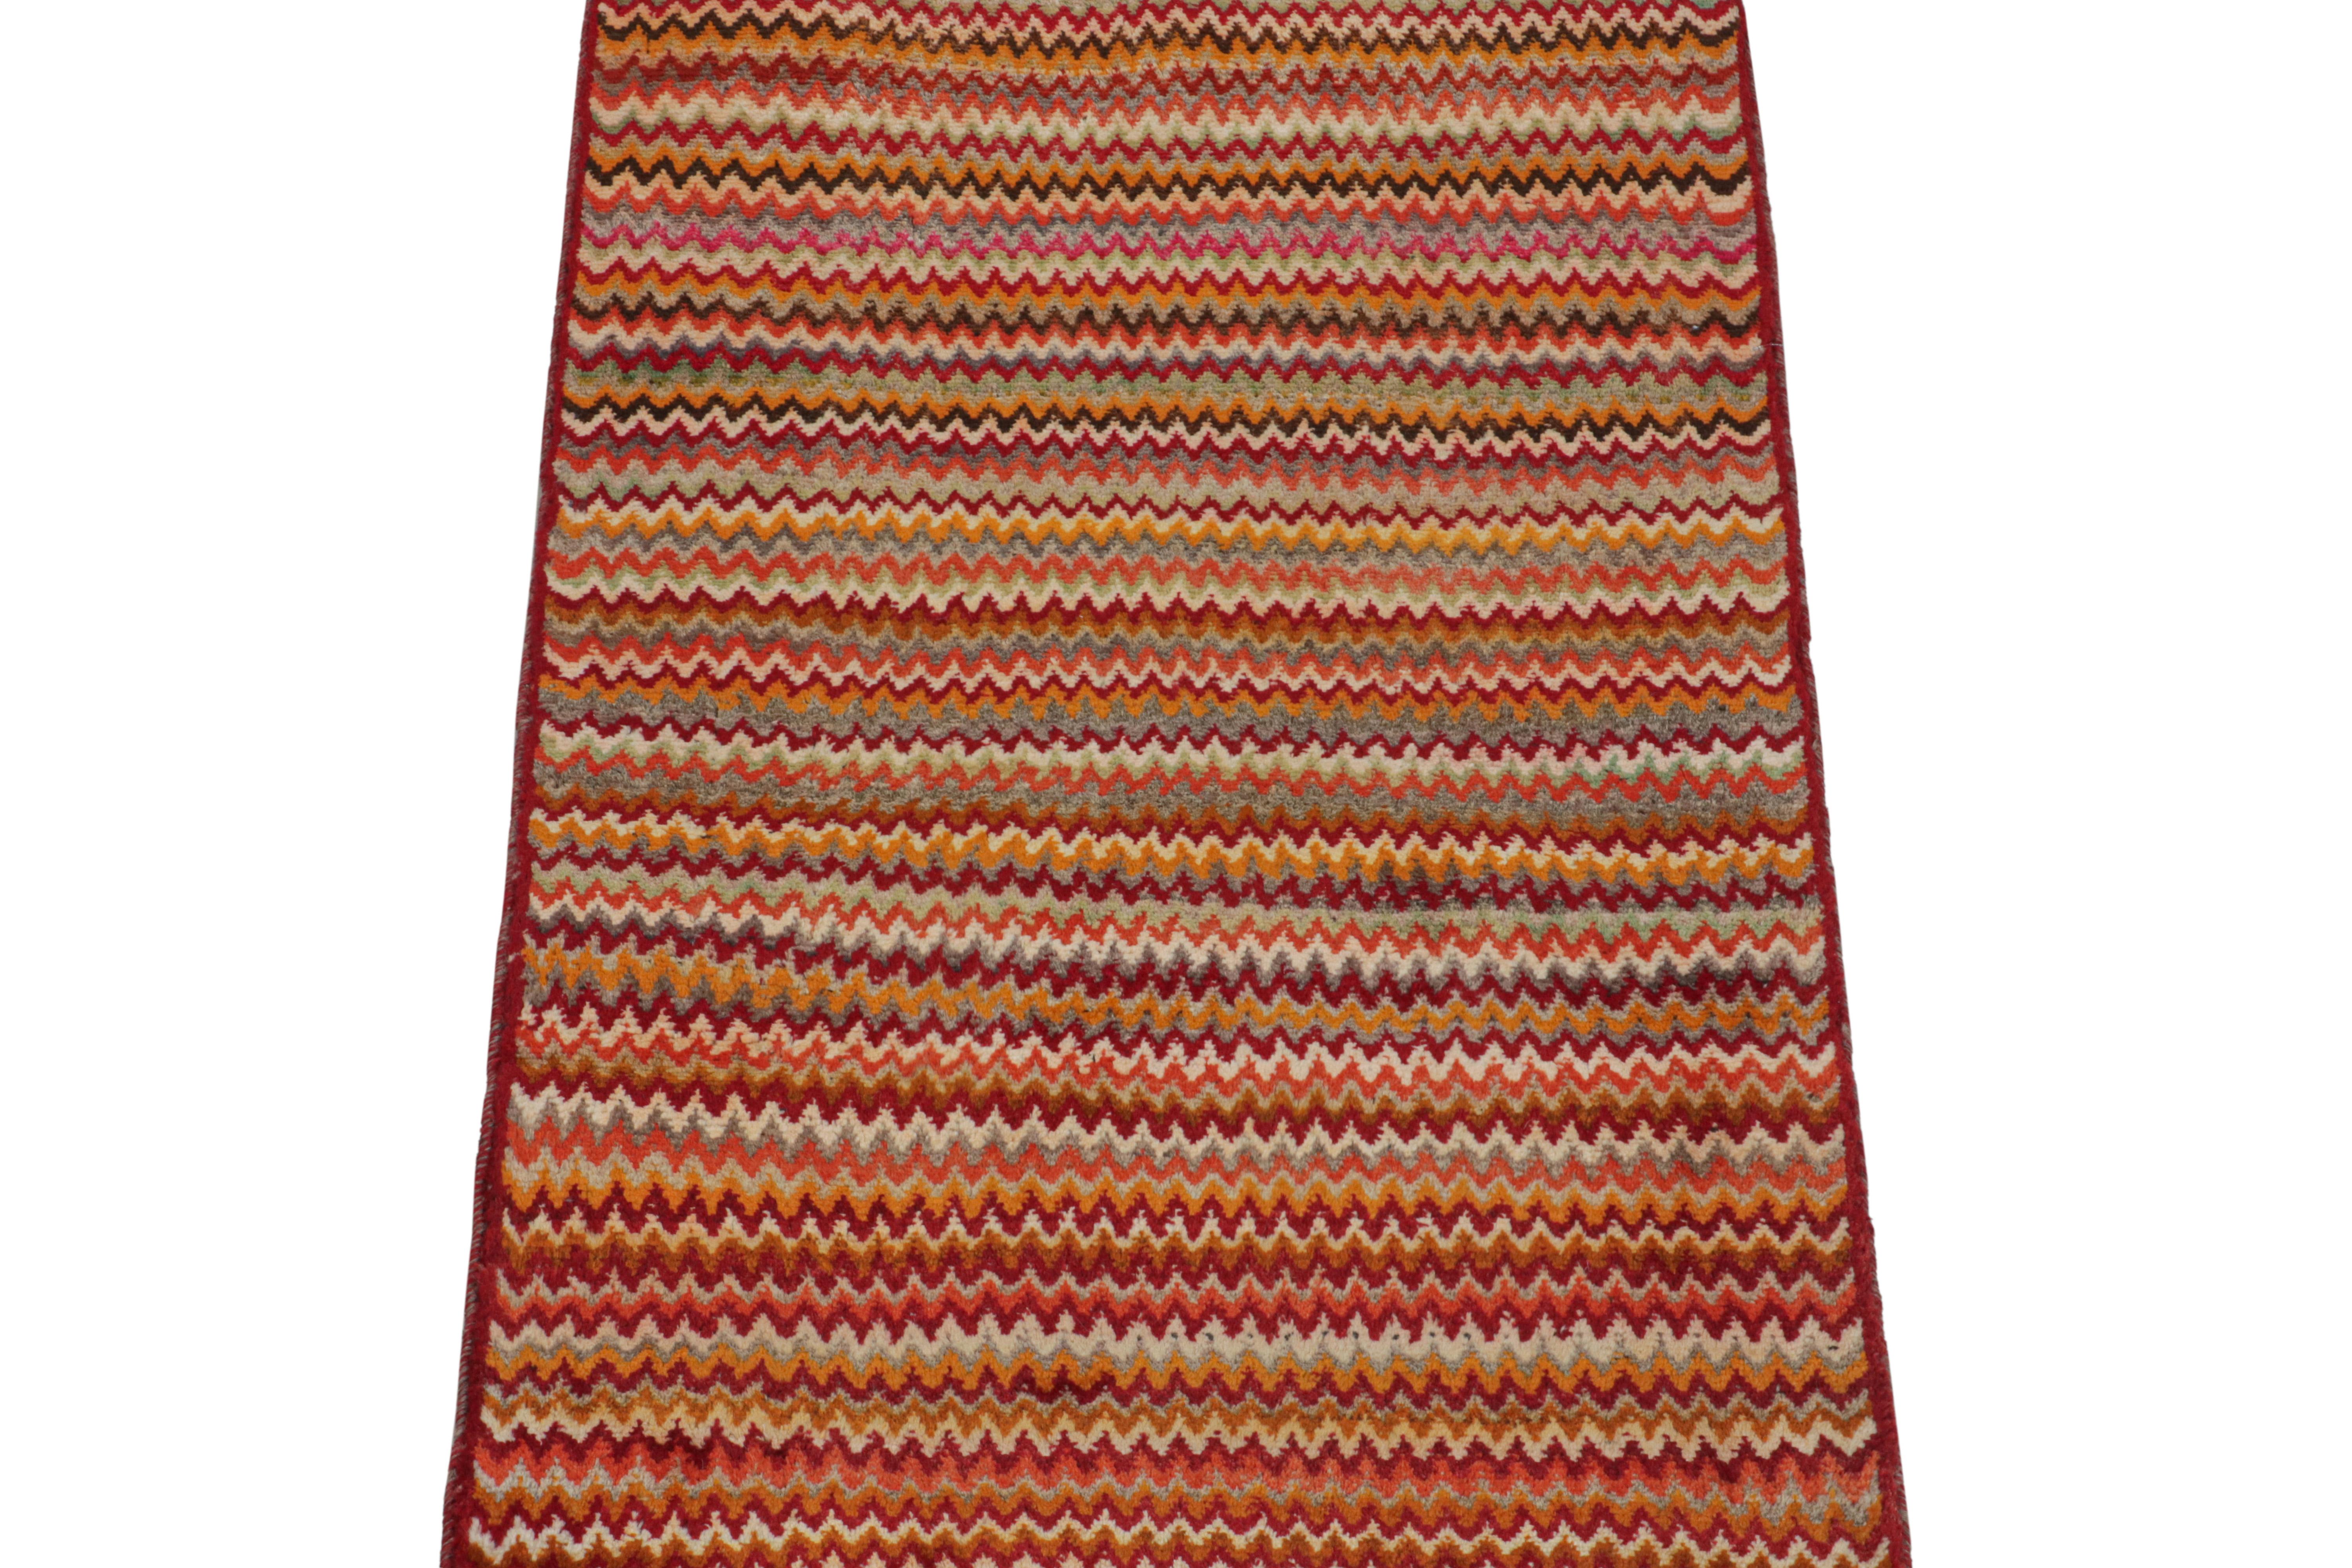 This vintage 3x5 Persian rug is a mid-century tribal piece, hand-knotted in wool circa 1950-1960.

Its design enjoys polychromatic chevron patterns with vibrant, warm colors like the red and gold in its many hues. Pieces like this represent the